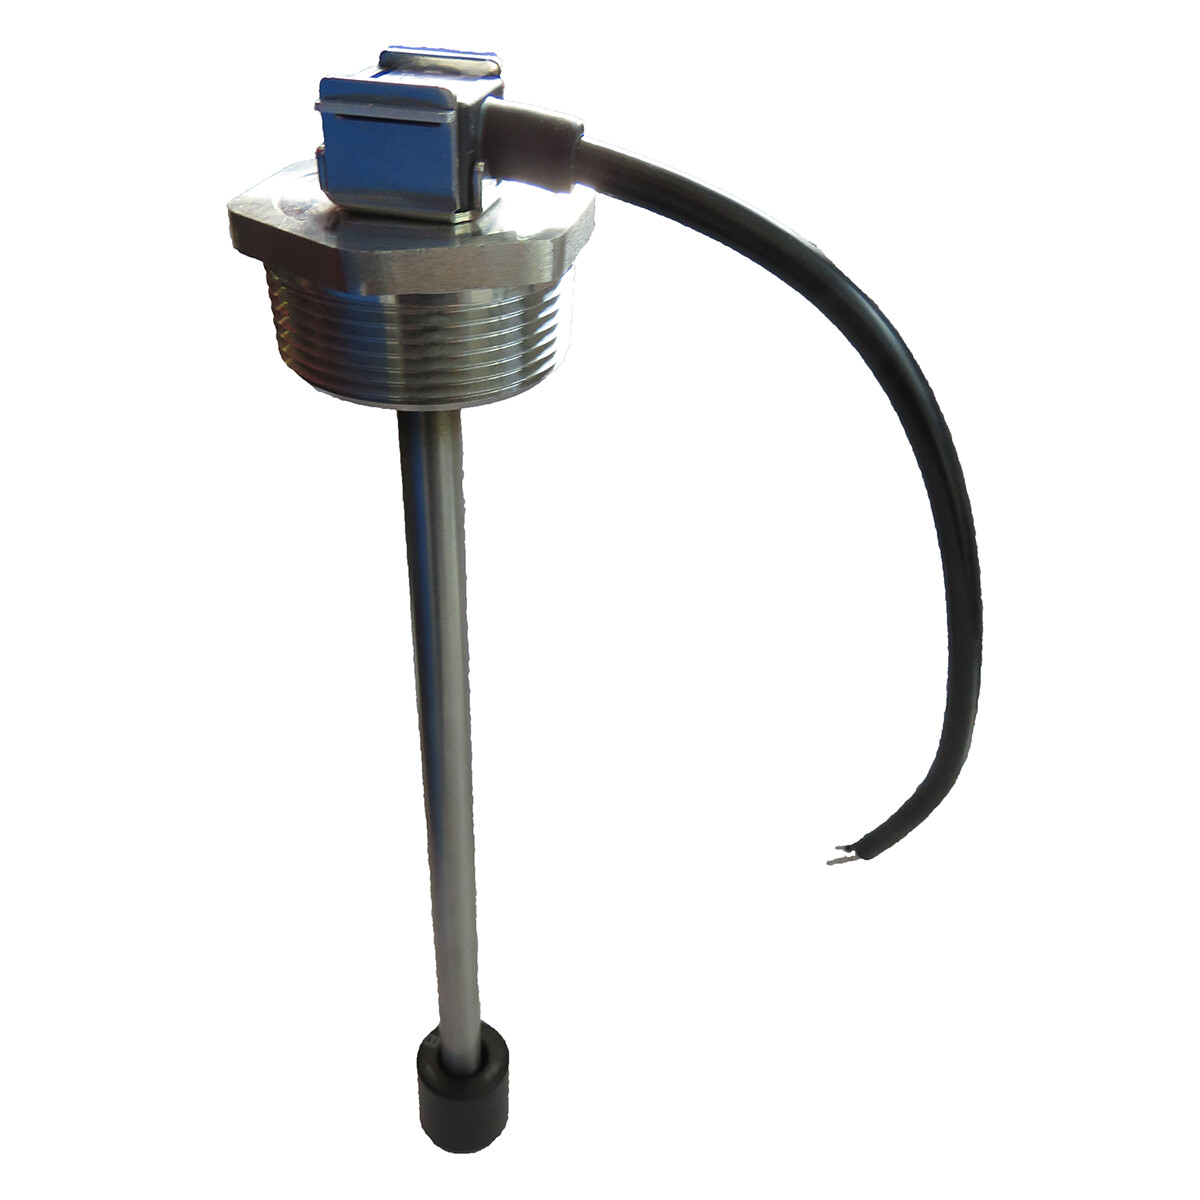 Rochester Sensors 9815-25240 Industrial Reed Switch Sender 24"L x 1.5" NPTF, 240-30 ohm Output